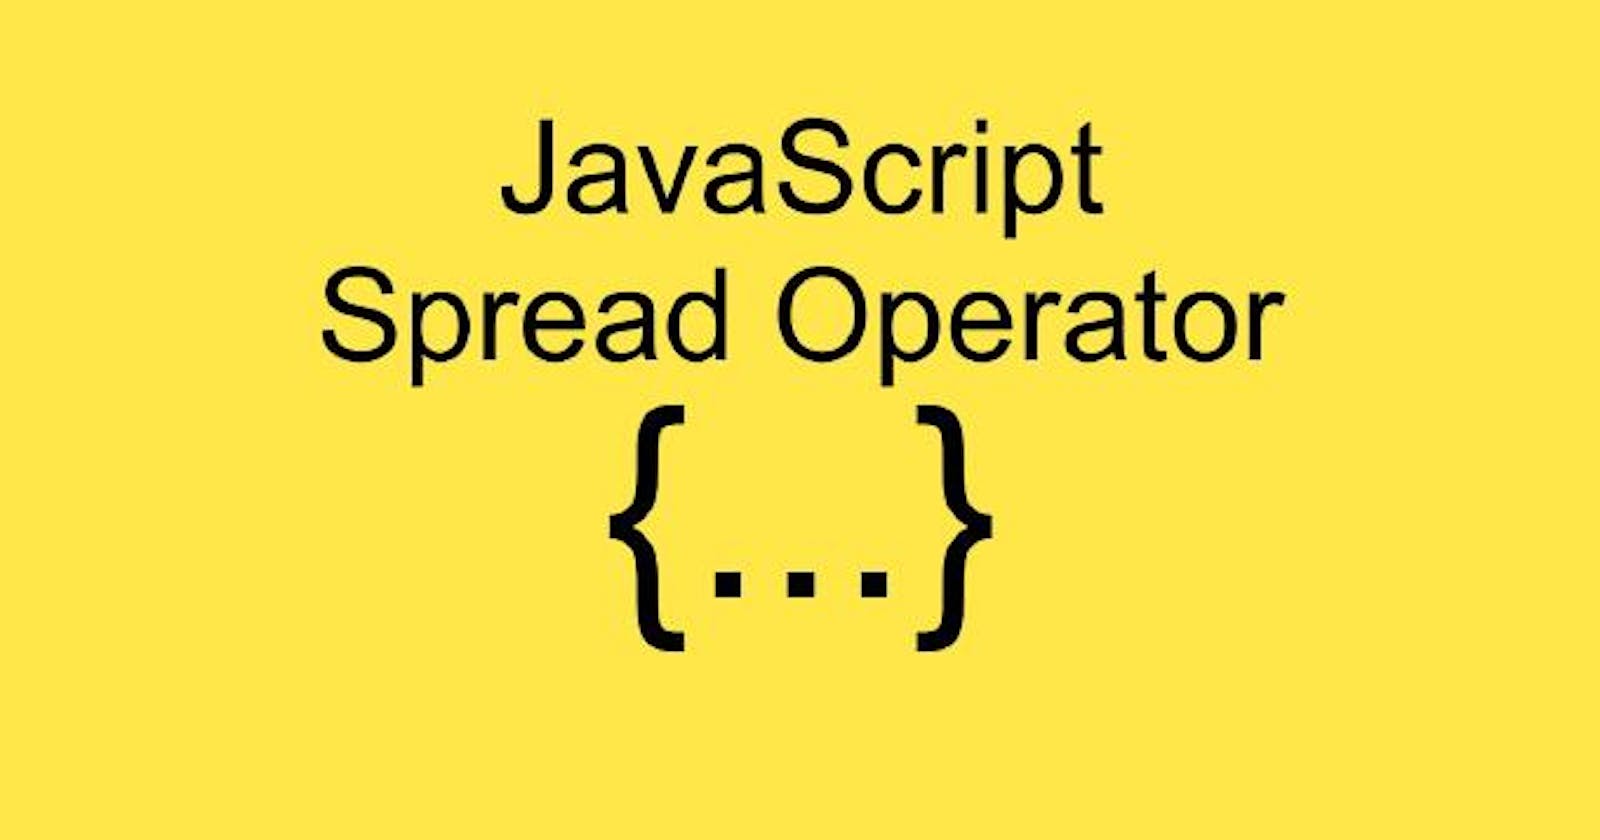 What is the spread operator in JavaScript and how to use it